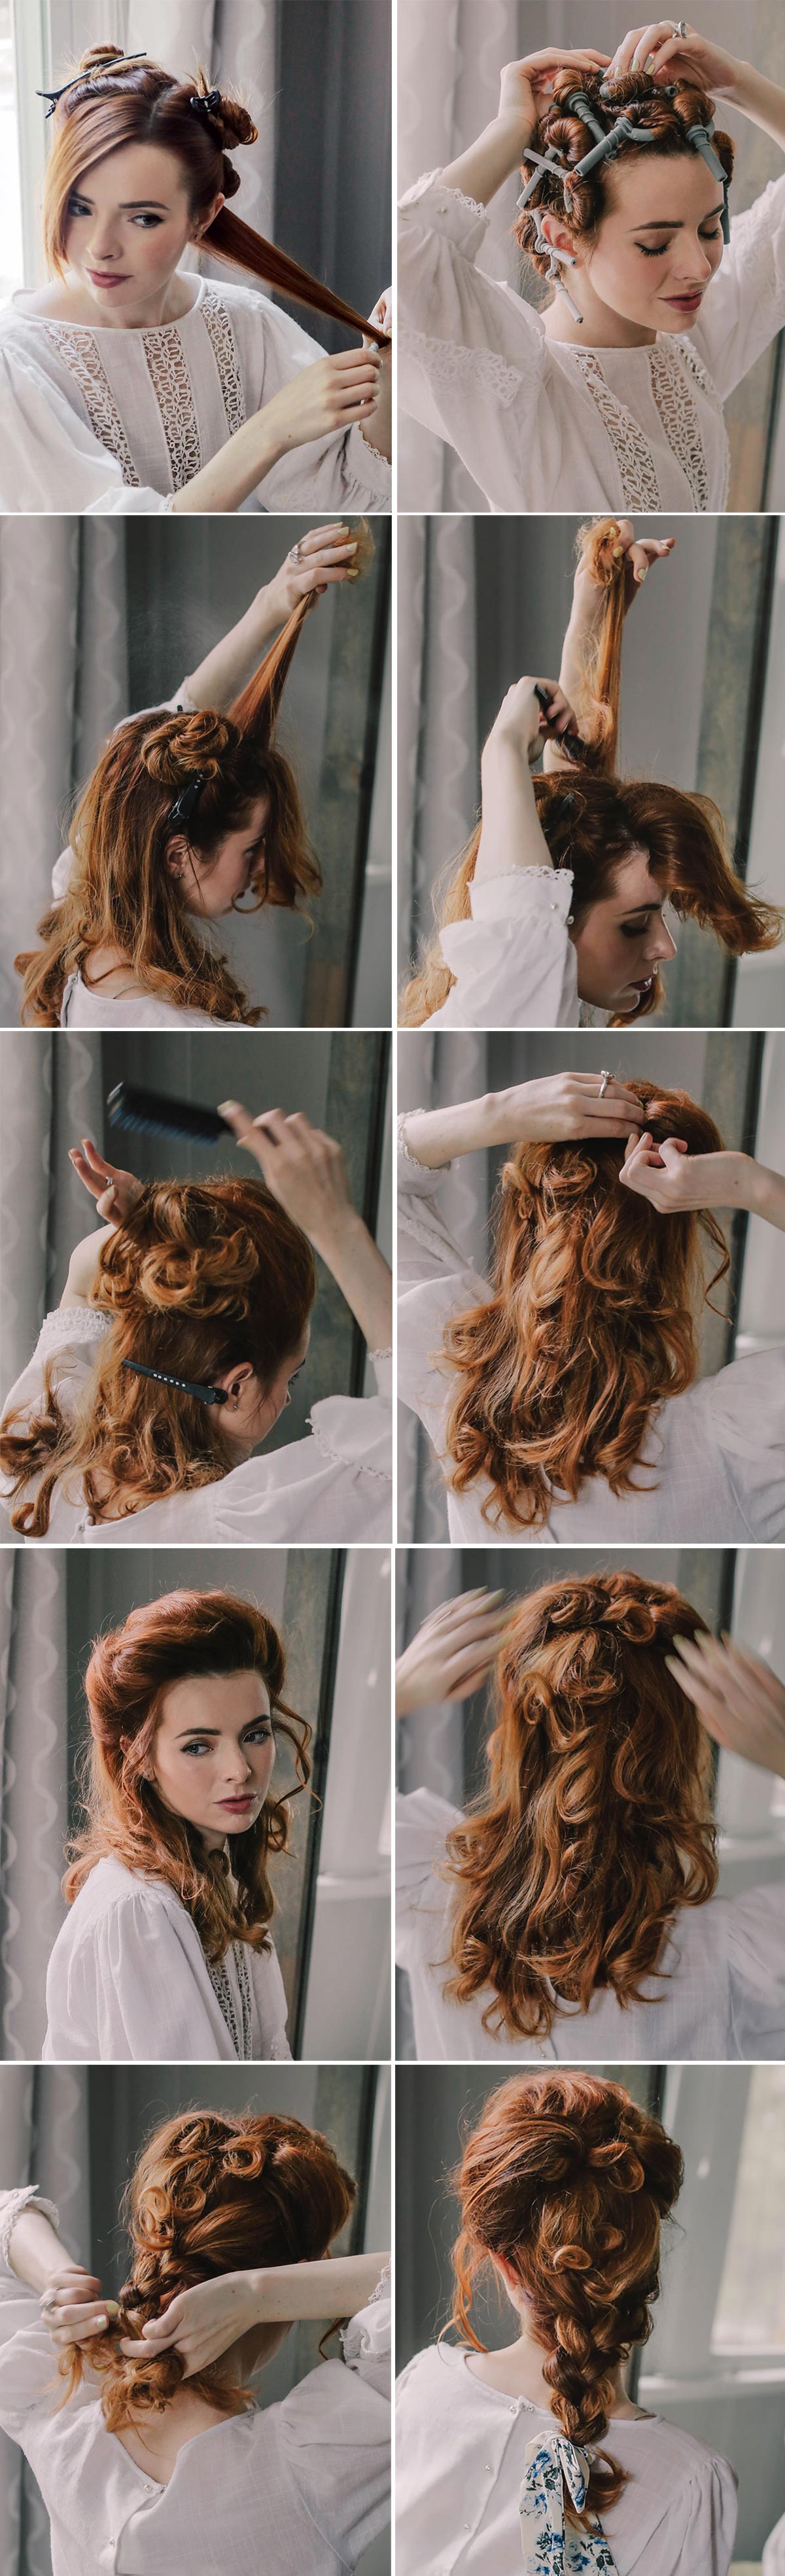 Hair Tutorial: Romantic Braid and Pouf Hairstyle - Sea of Shoes